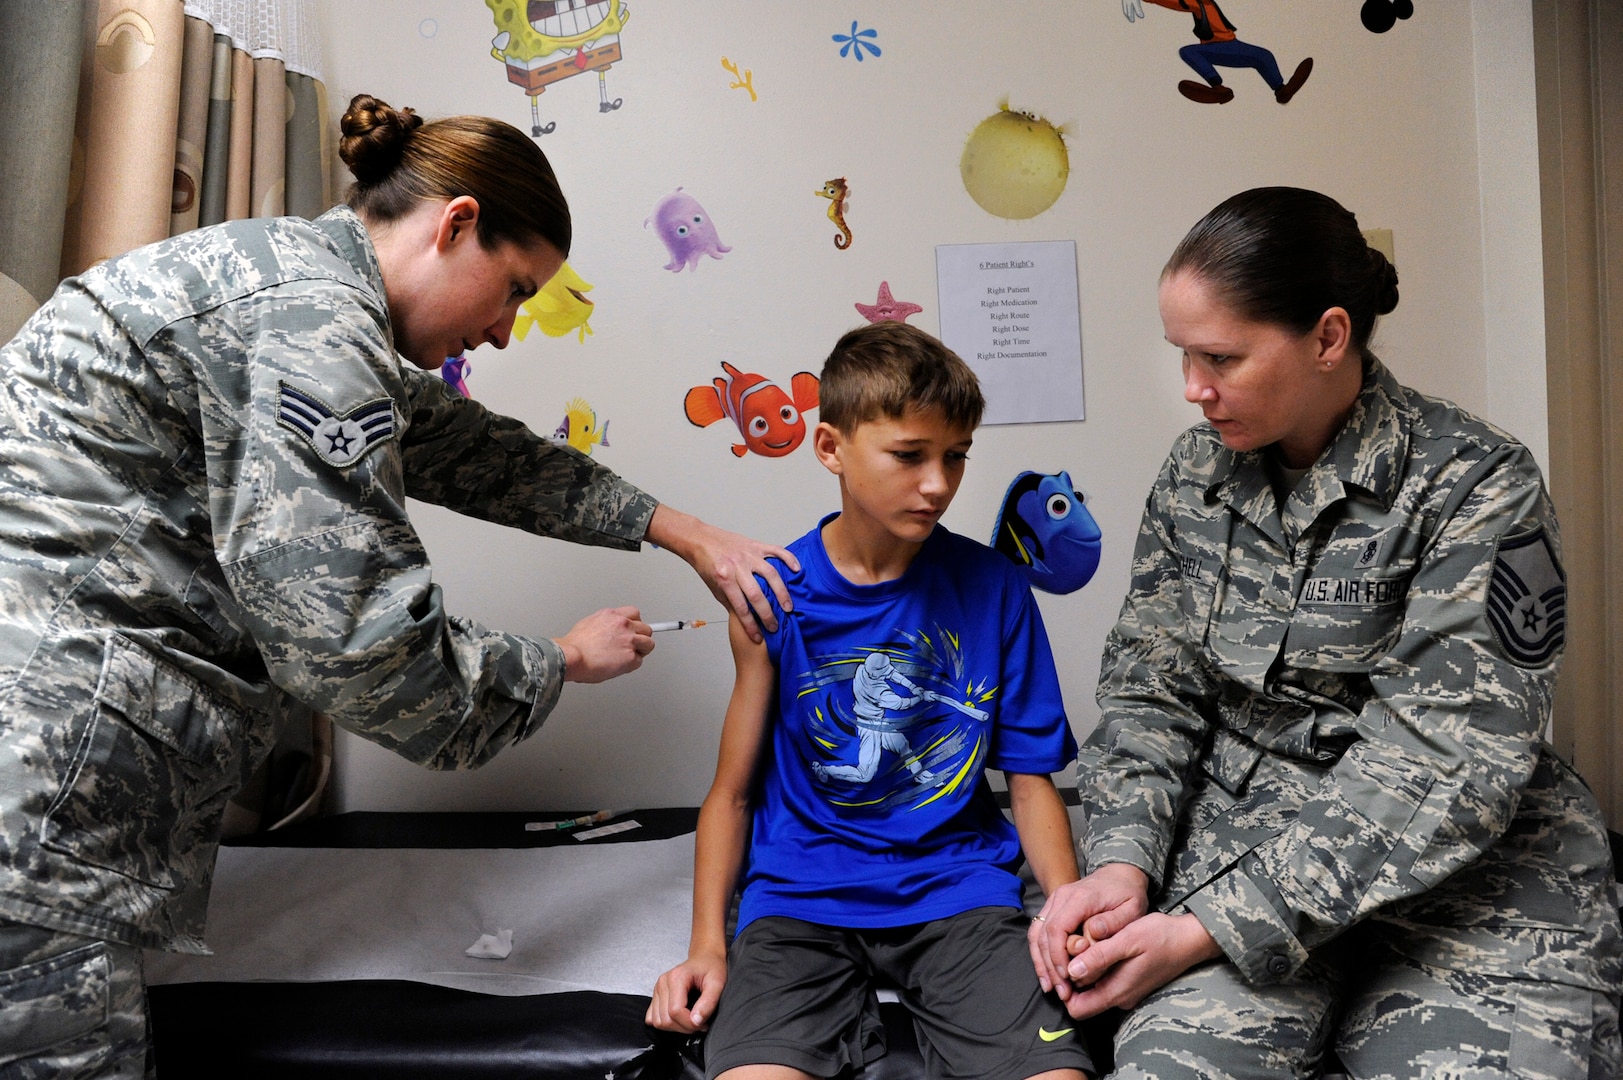 Senior Airman Kelly Boos, left, administers multiple vaccinations to Andrew Mitchell Aug. 6, 2014, as his mother, Master Sgt. Kimberly Mitchell, right, holds his hand at the Joint Base San Antonio Immunizations Clinic.. Boos is an aerospace medical technician and Mitchell is the NCO in charge at the ear, nose and throat clinic. (U.S. Air Force photo/Desiree N. Palacios)